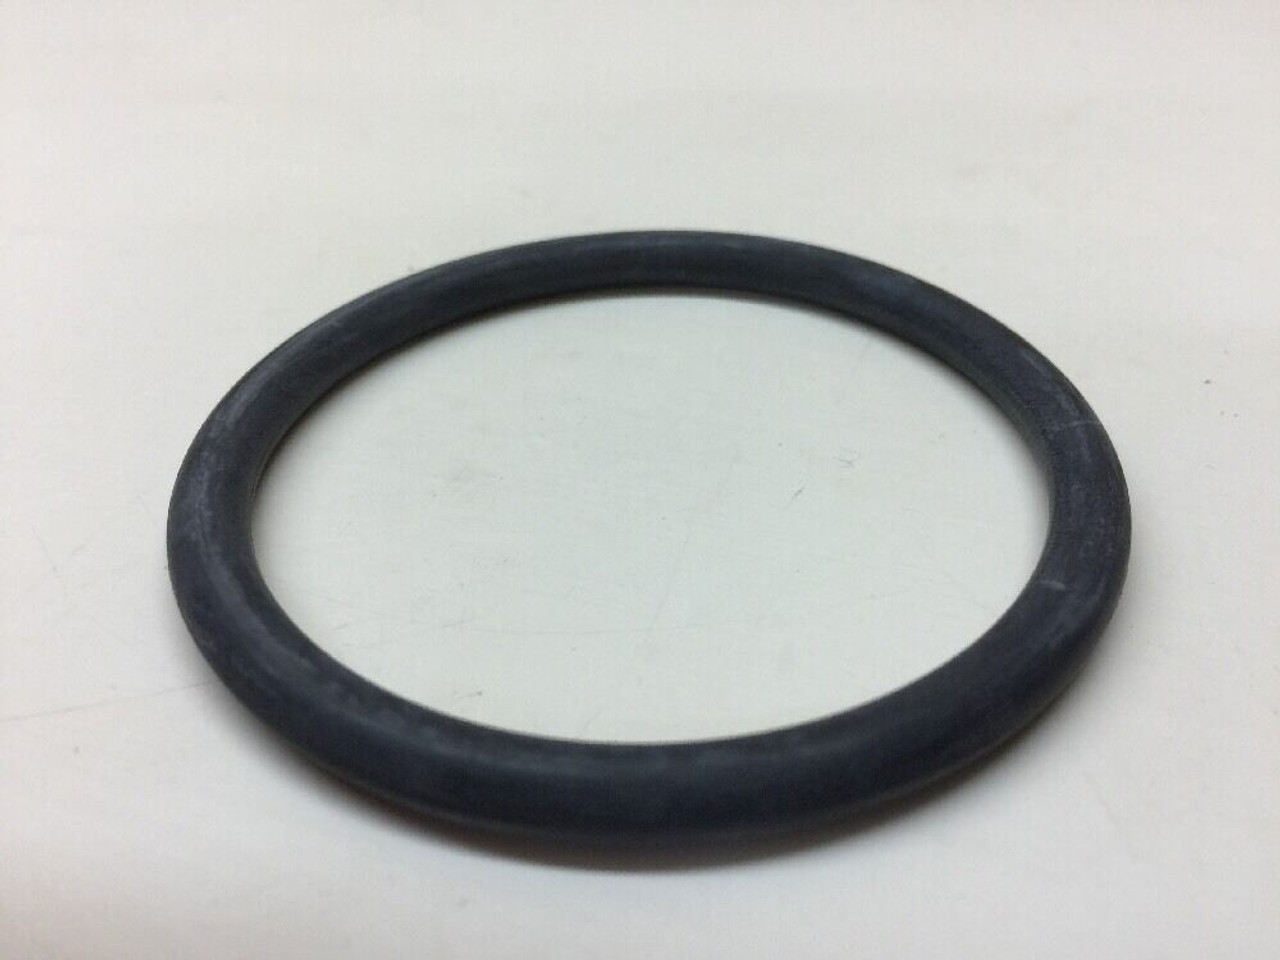 O-Ring Seal MS29513-332 Parco Black Rubber Aircraft Lot of 5